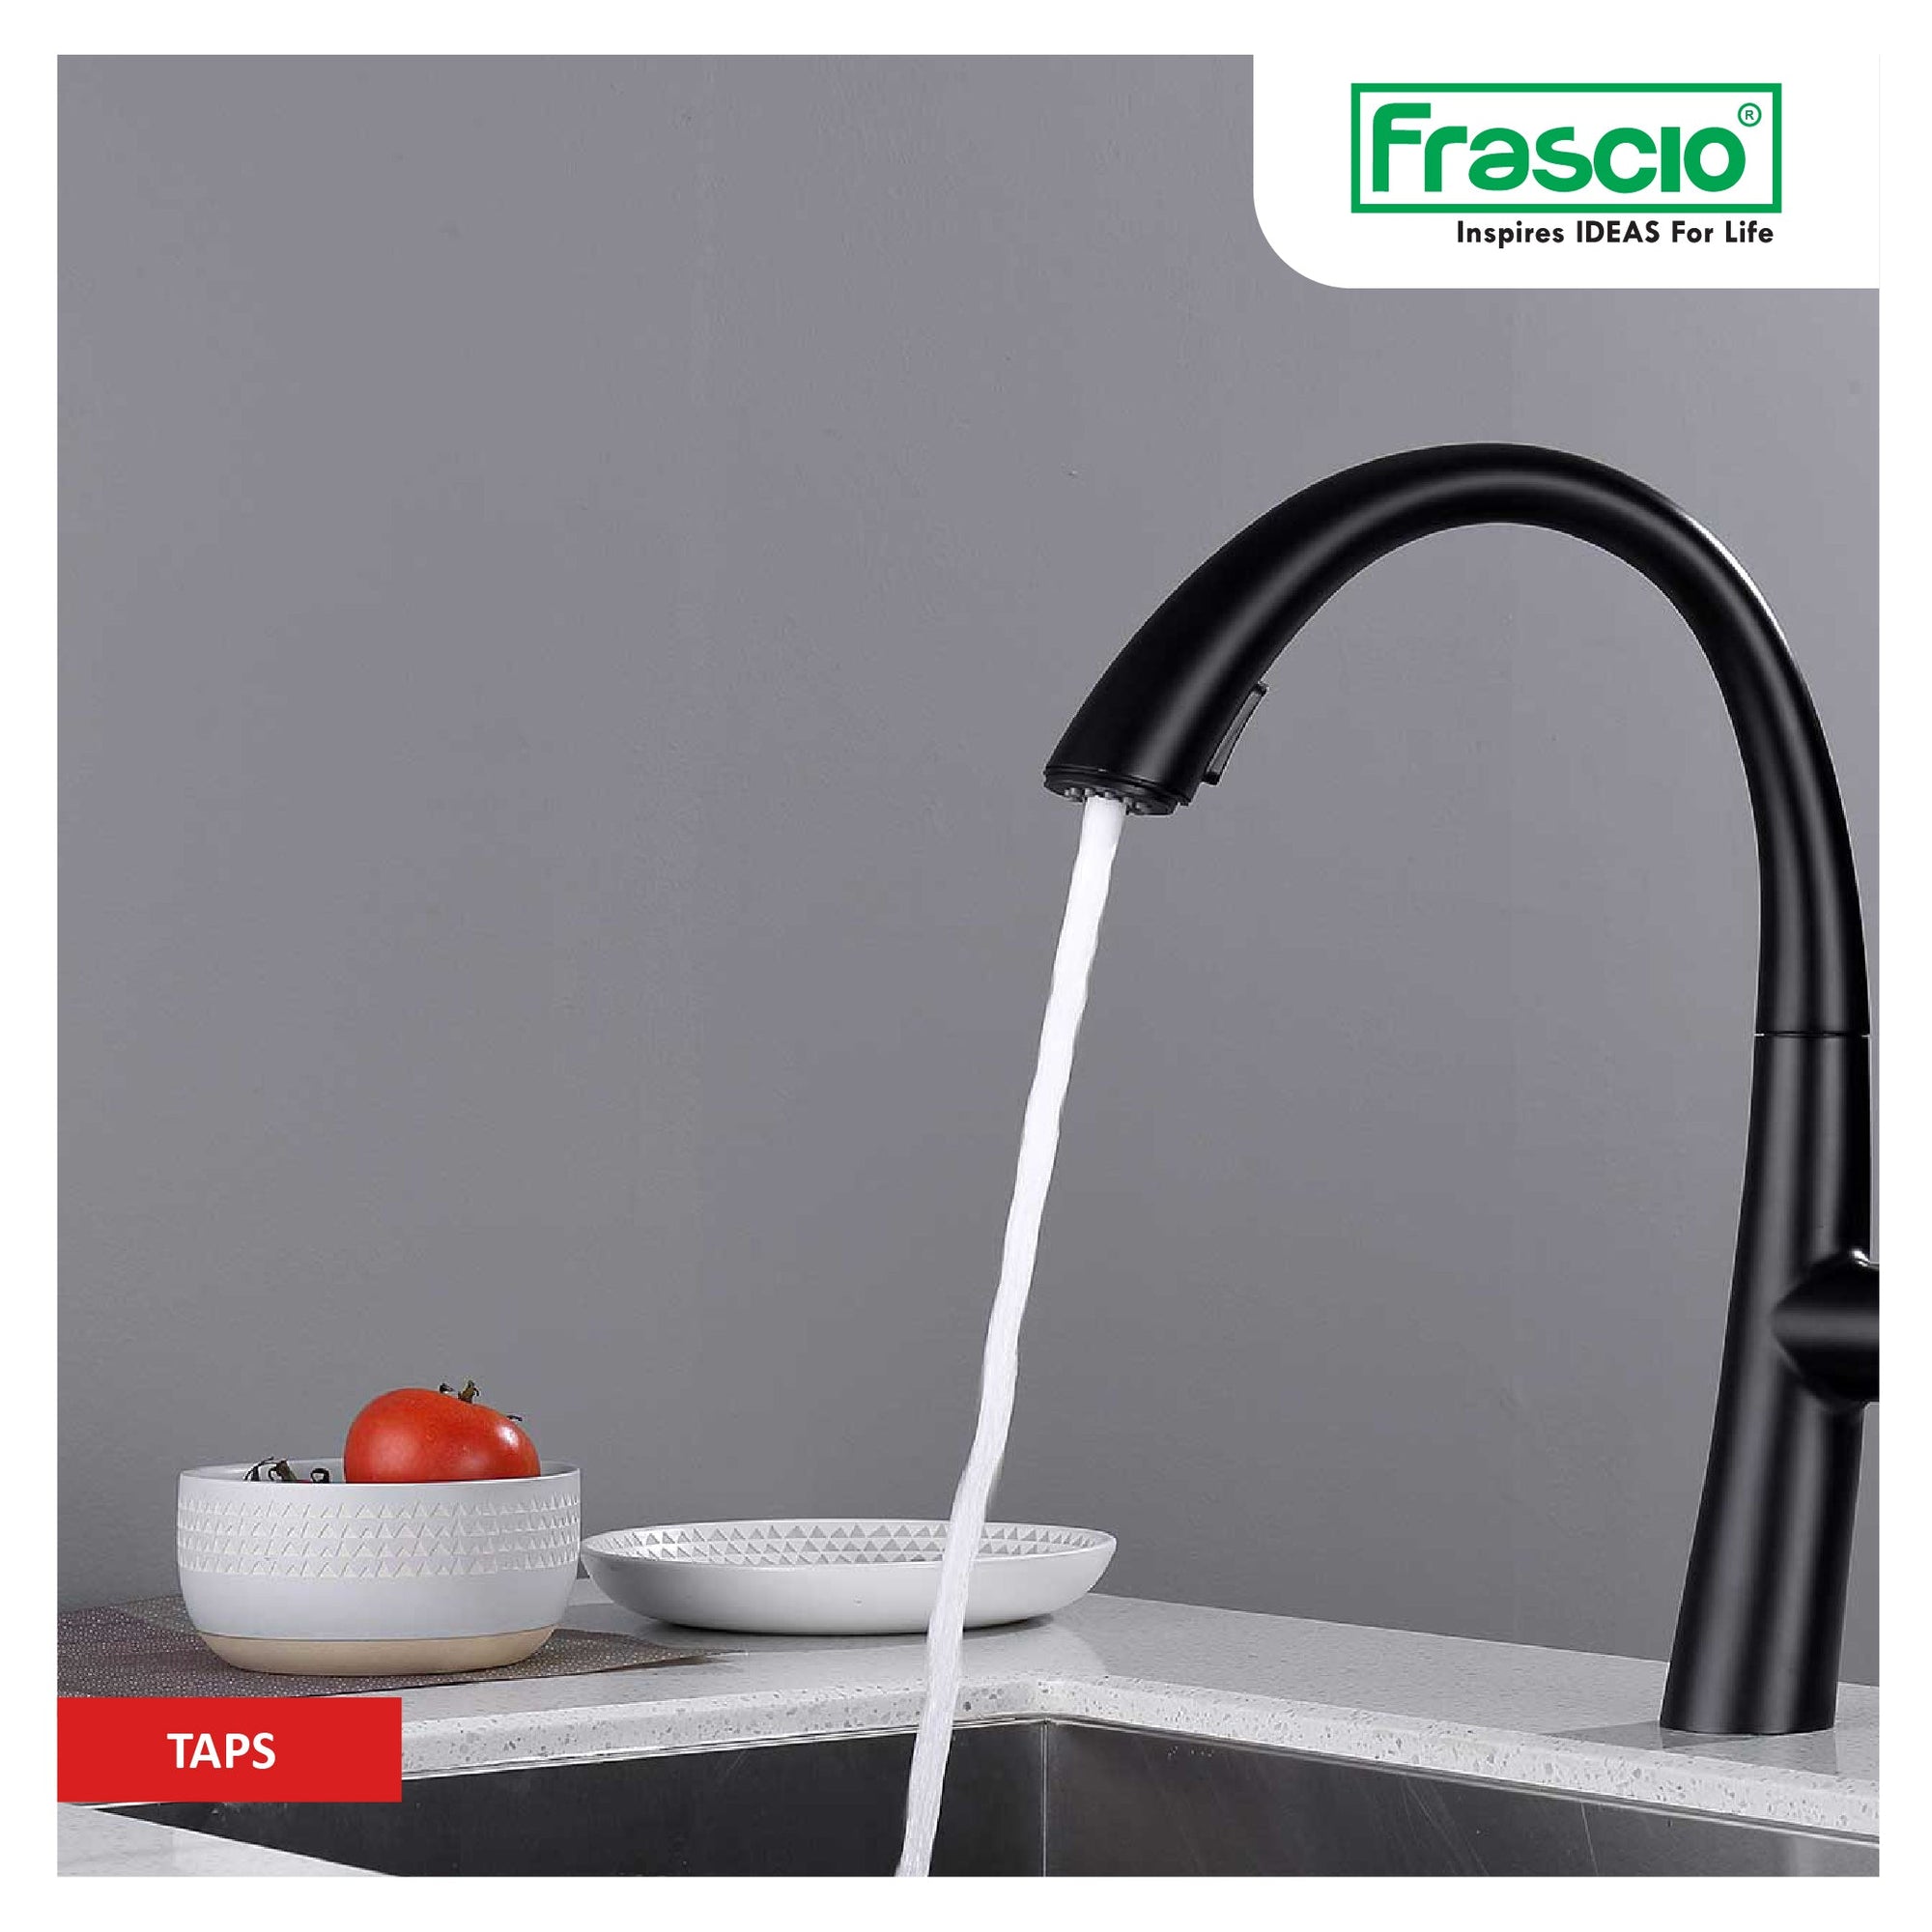 Frascio Taps - Enhance Your Kitchen and Bathroom Experience with Premium Water Fixtures